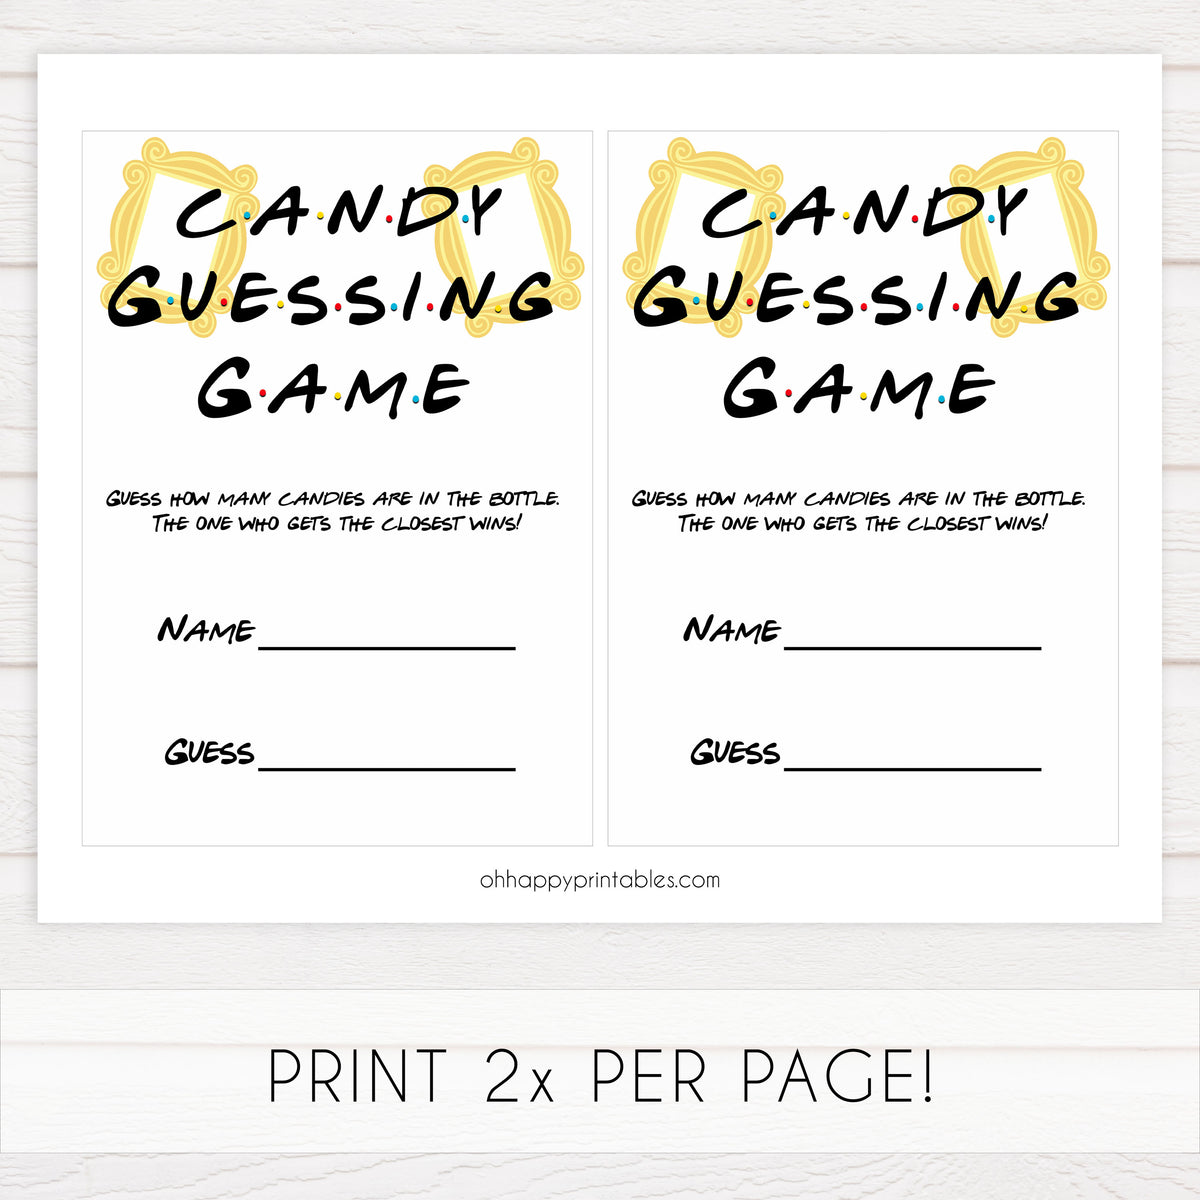 Free Printable Candy Guessing Game Sheet